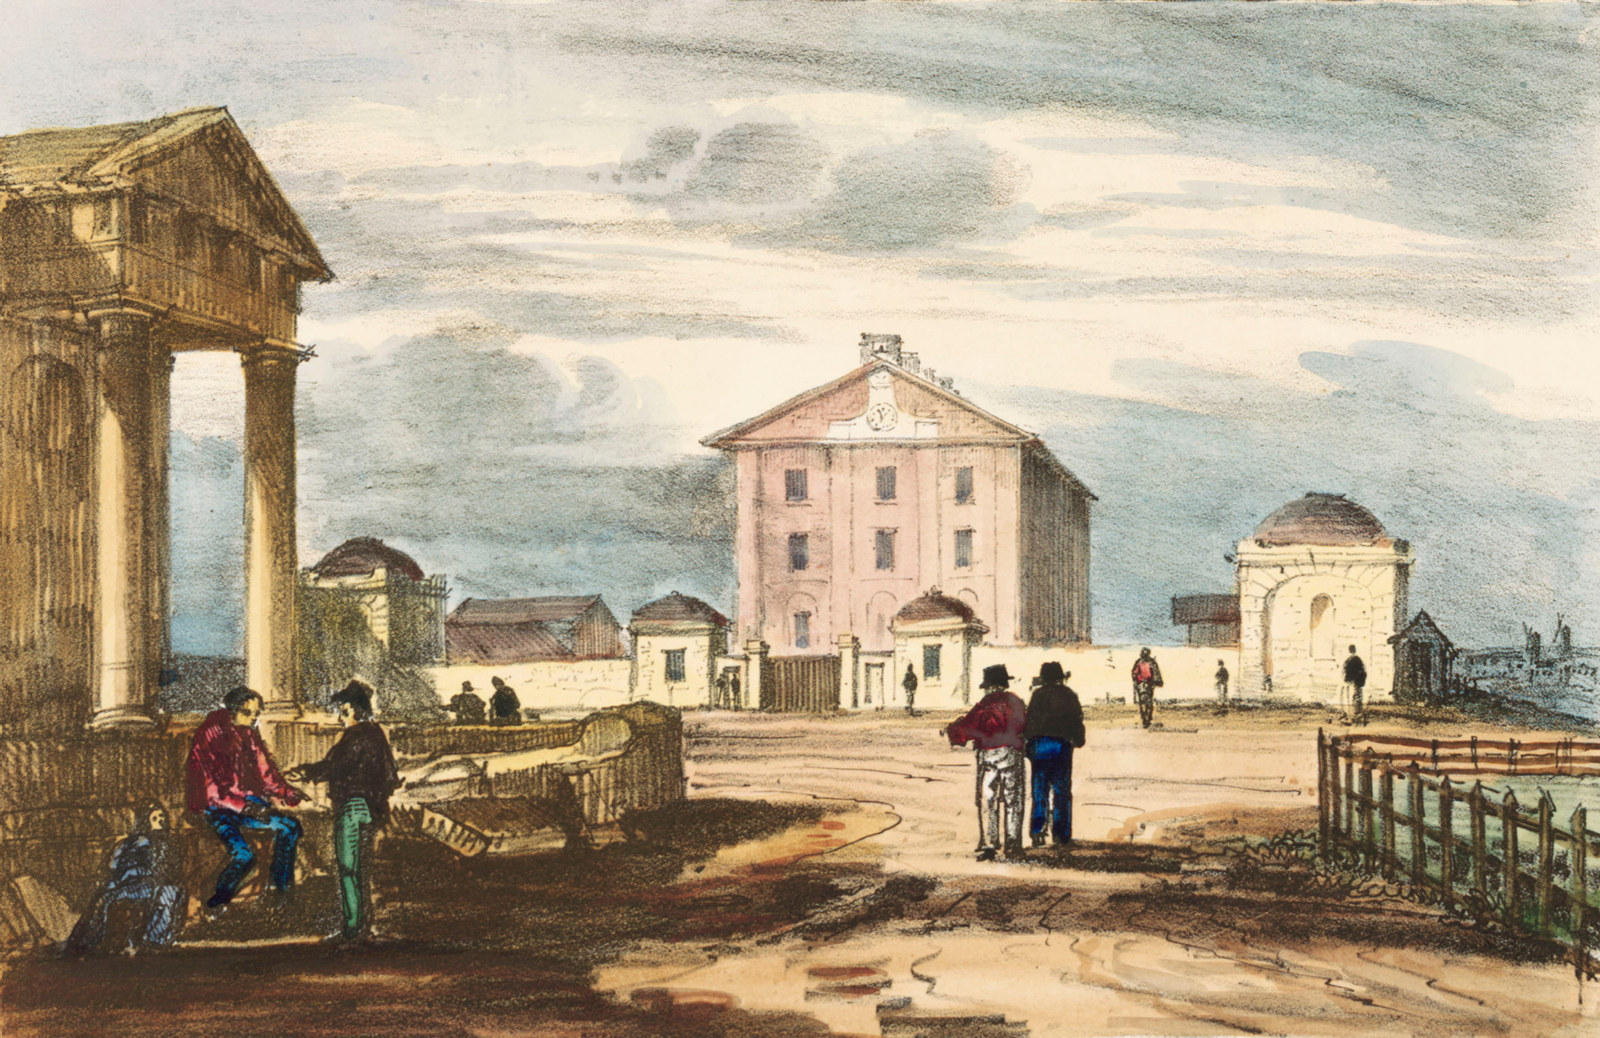 Groups of men standing or sitting in a town square, some of whom are looking back toward large building, Hyde Park Barracks, with front wall featuring dome-roofed cottages on either side of a large timber gate. Clouds drift overhead.